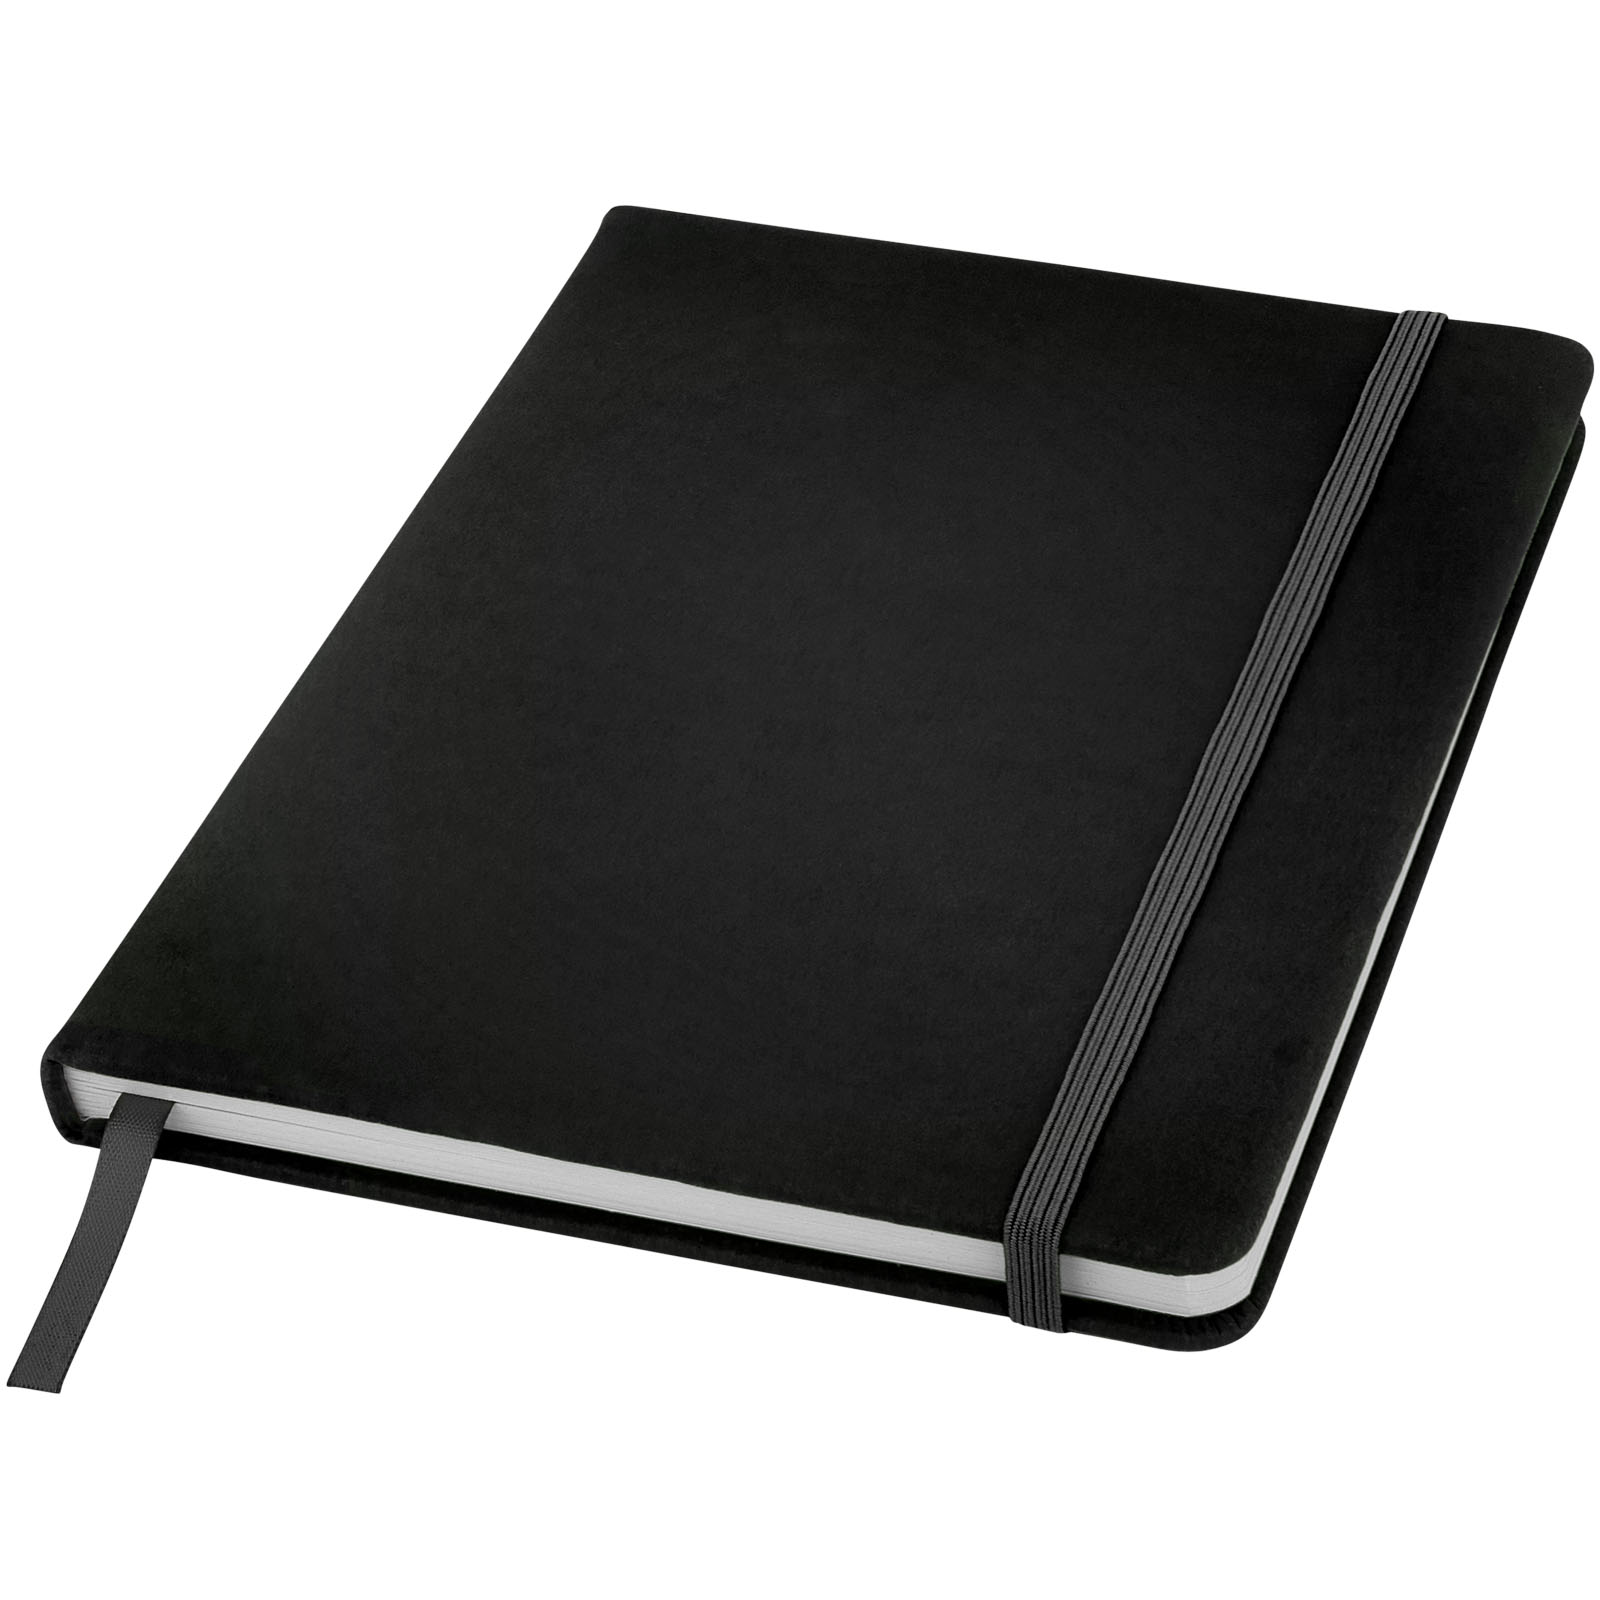 Advertising Hard cover notebooks - Spectrum A5 notebook with blank pages - 0